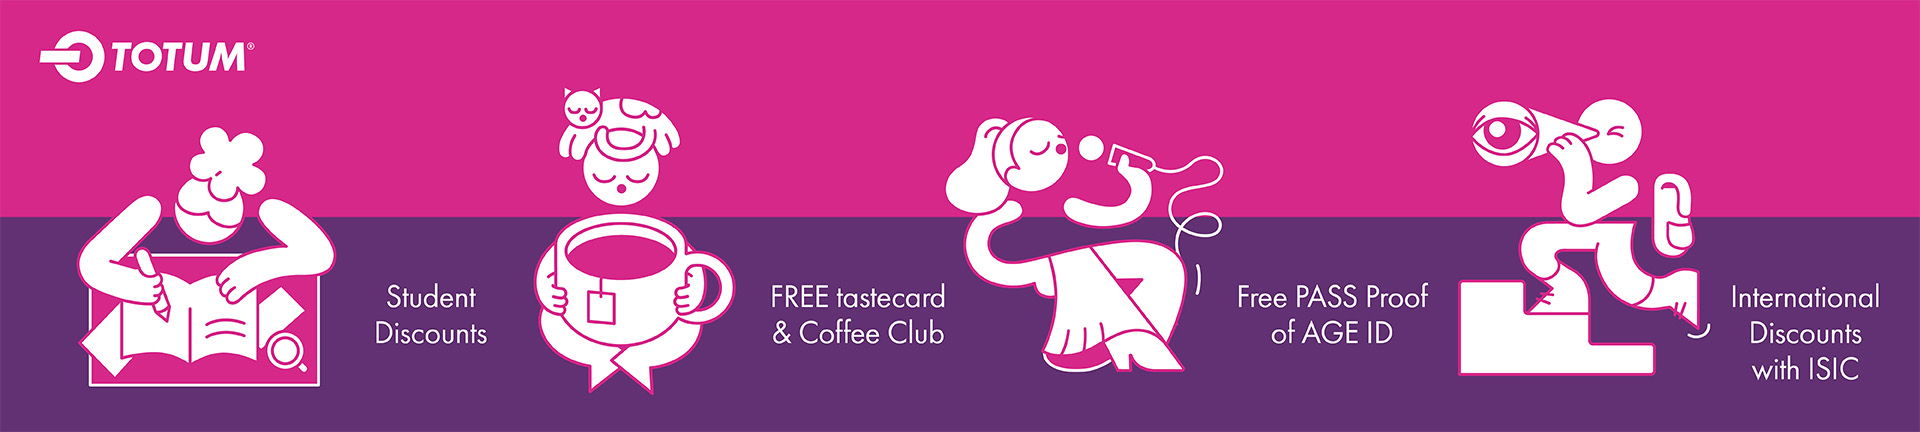 A pink and purple background with a white TOTUM logo in the top left corner. Below are images of cartoon people, with the text 'student discounts'. 'free tastecard & coffee club', 'free pass proof of age ID', 'international discounts with ISIC'.